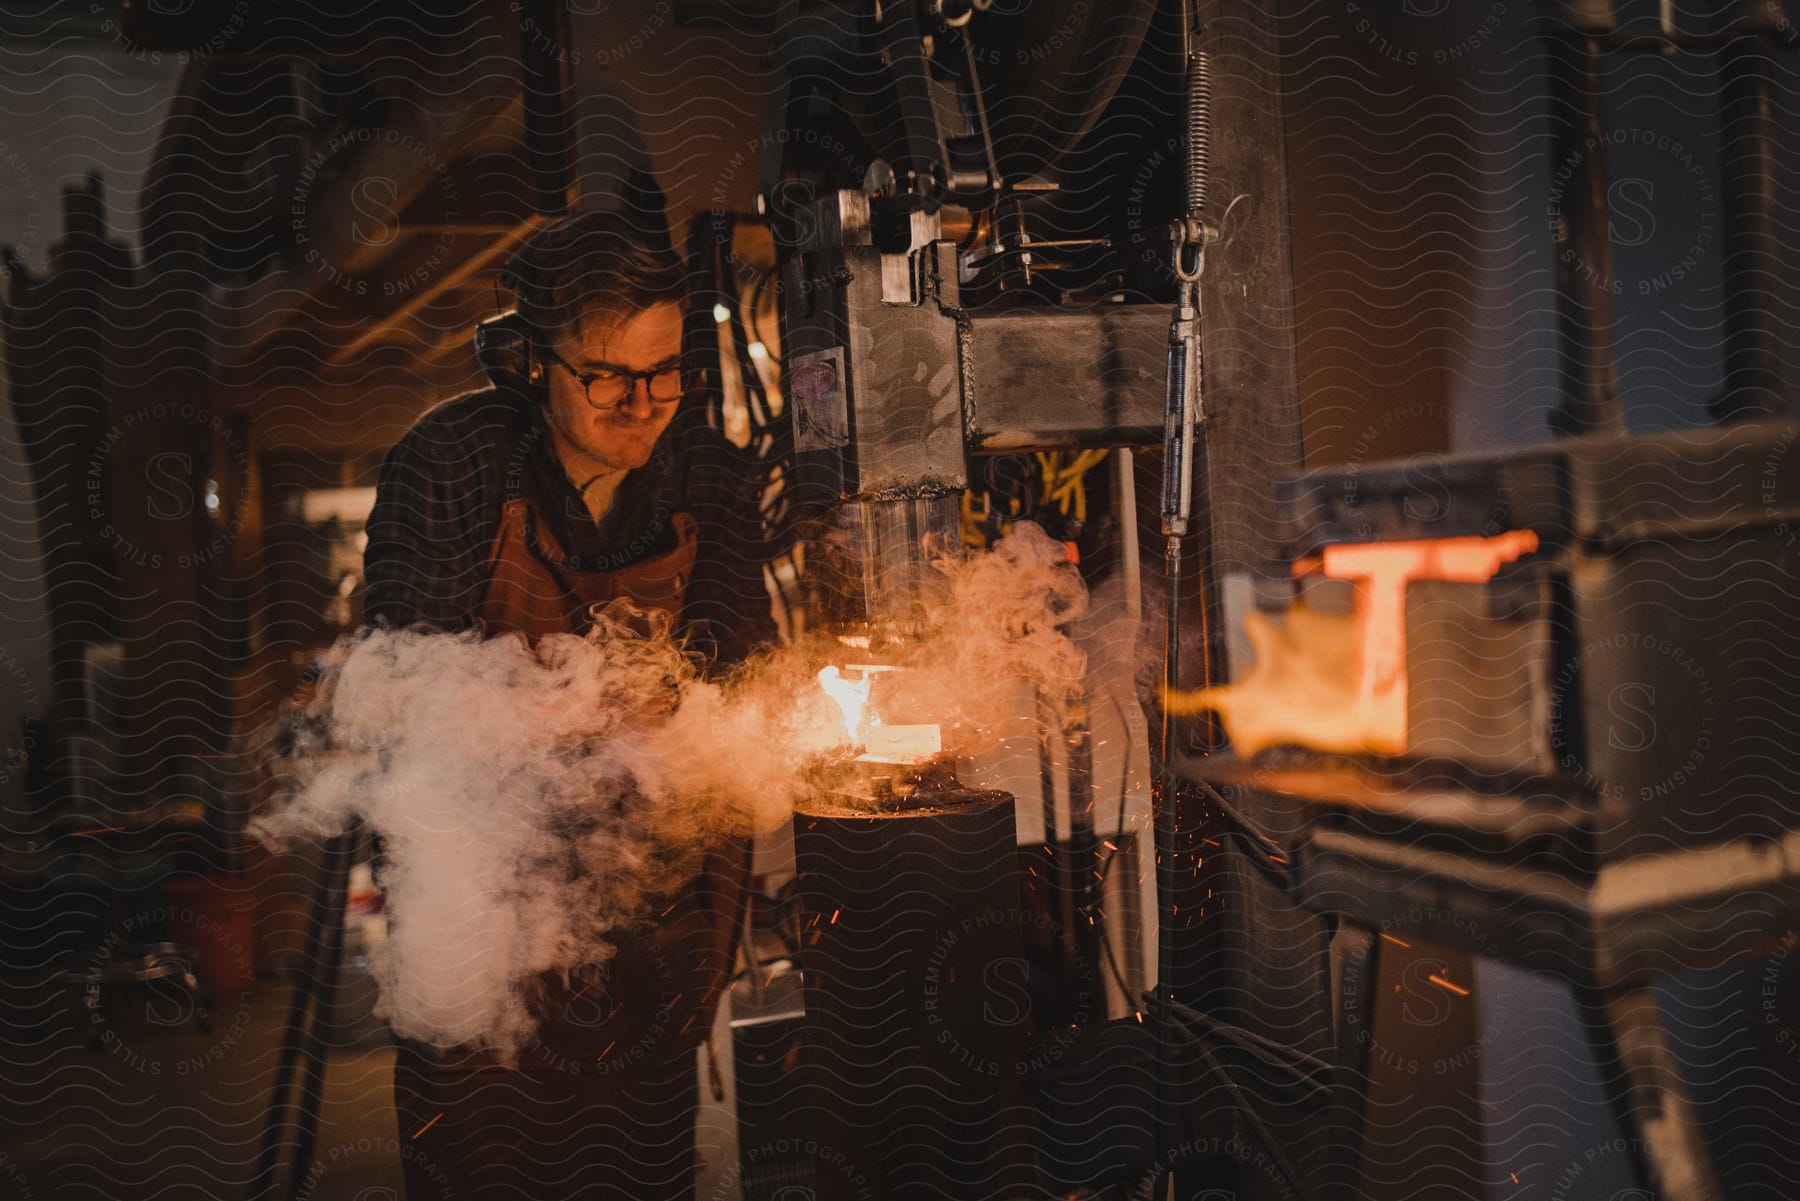 A determined adult male working with hot metal and machinery in a studio to create a forged item